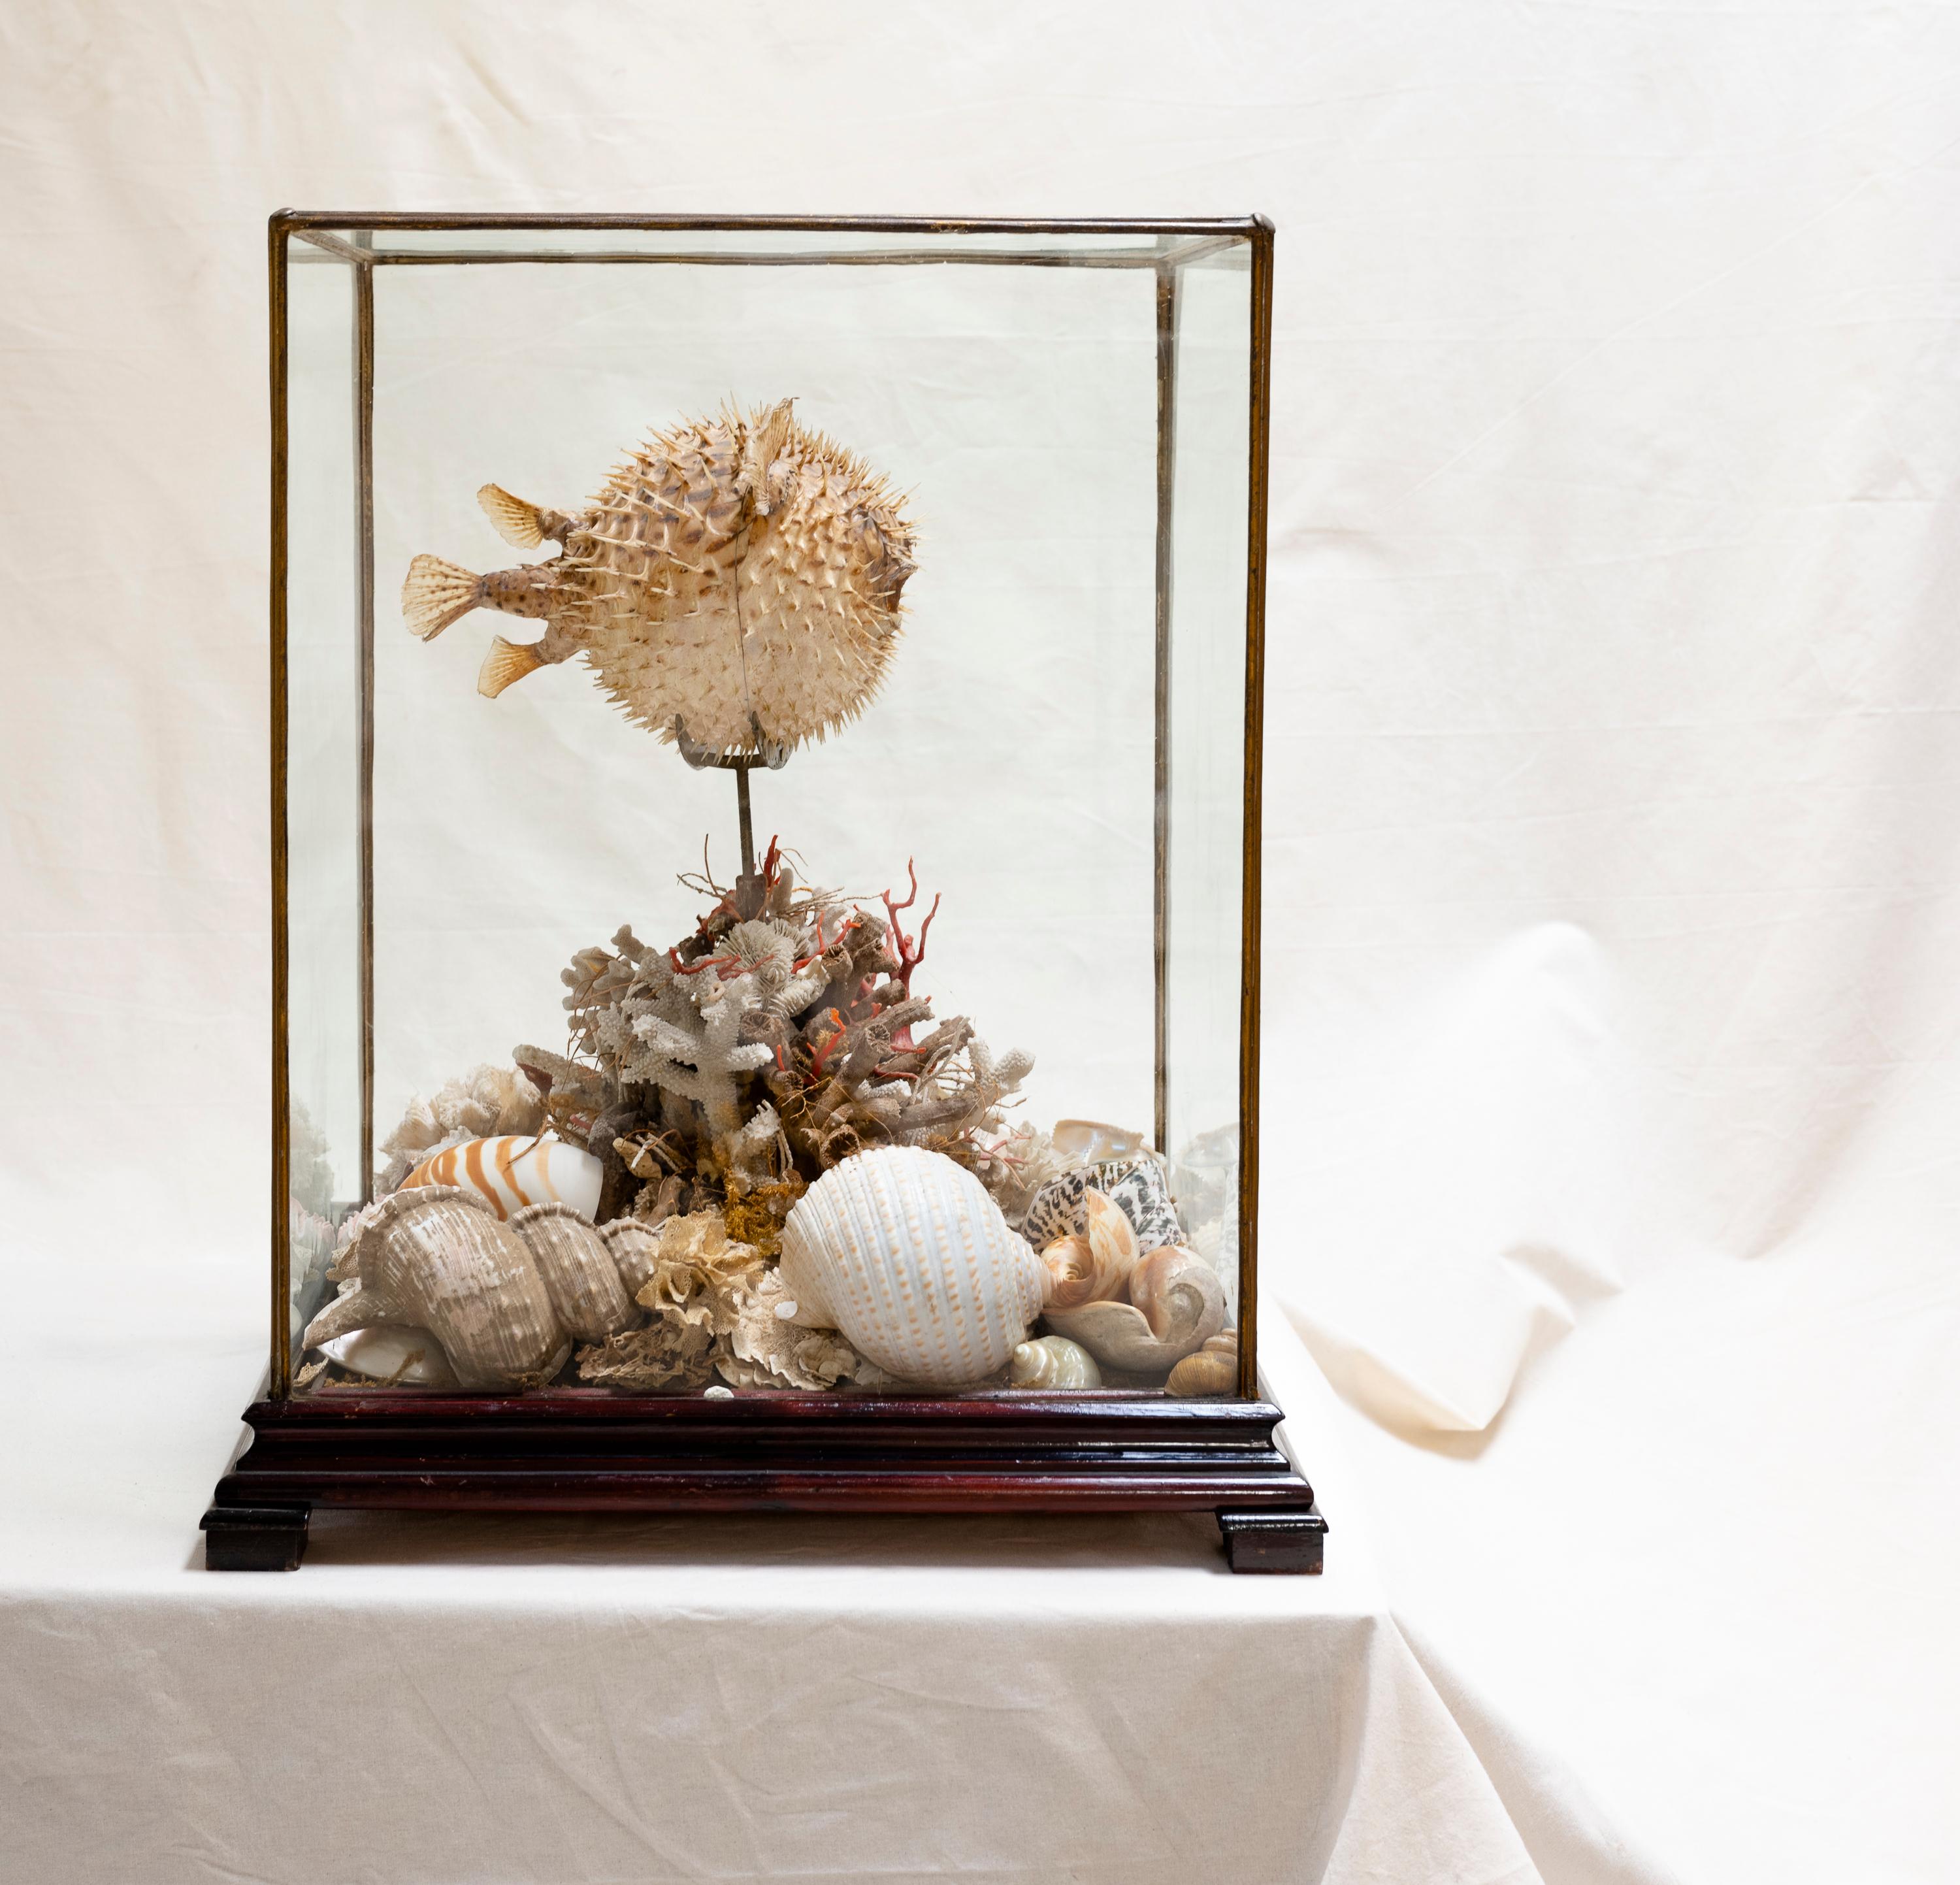 Originally from the Costa Brava in Spain, and brought to America near the turn of the last century, this incredible taxidermy blowfish with shells and Mediterranean sea elements remains in great condition, and will elevate any space. The hand-blown